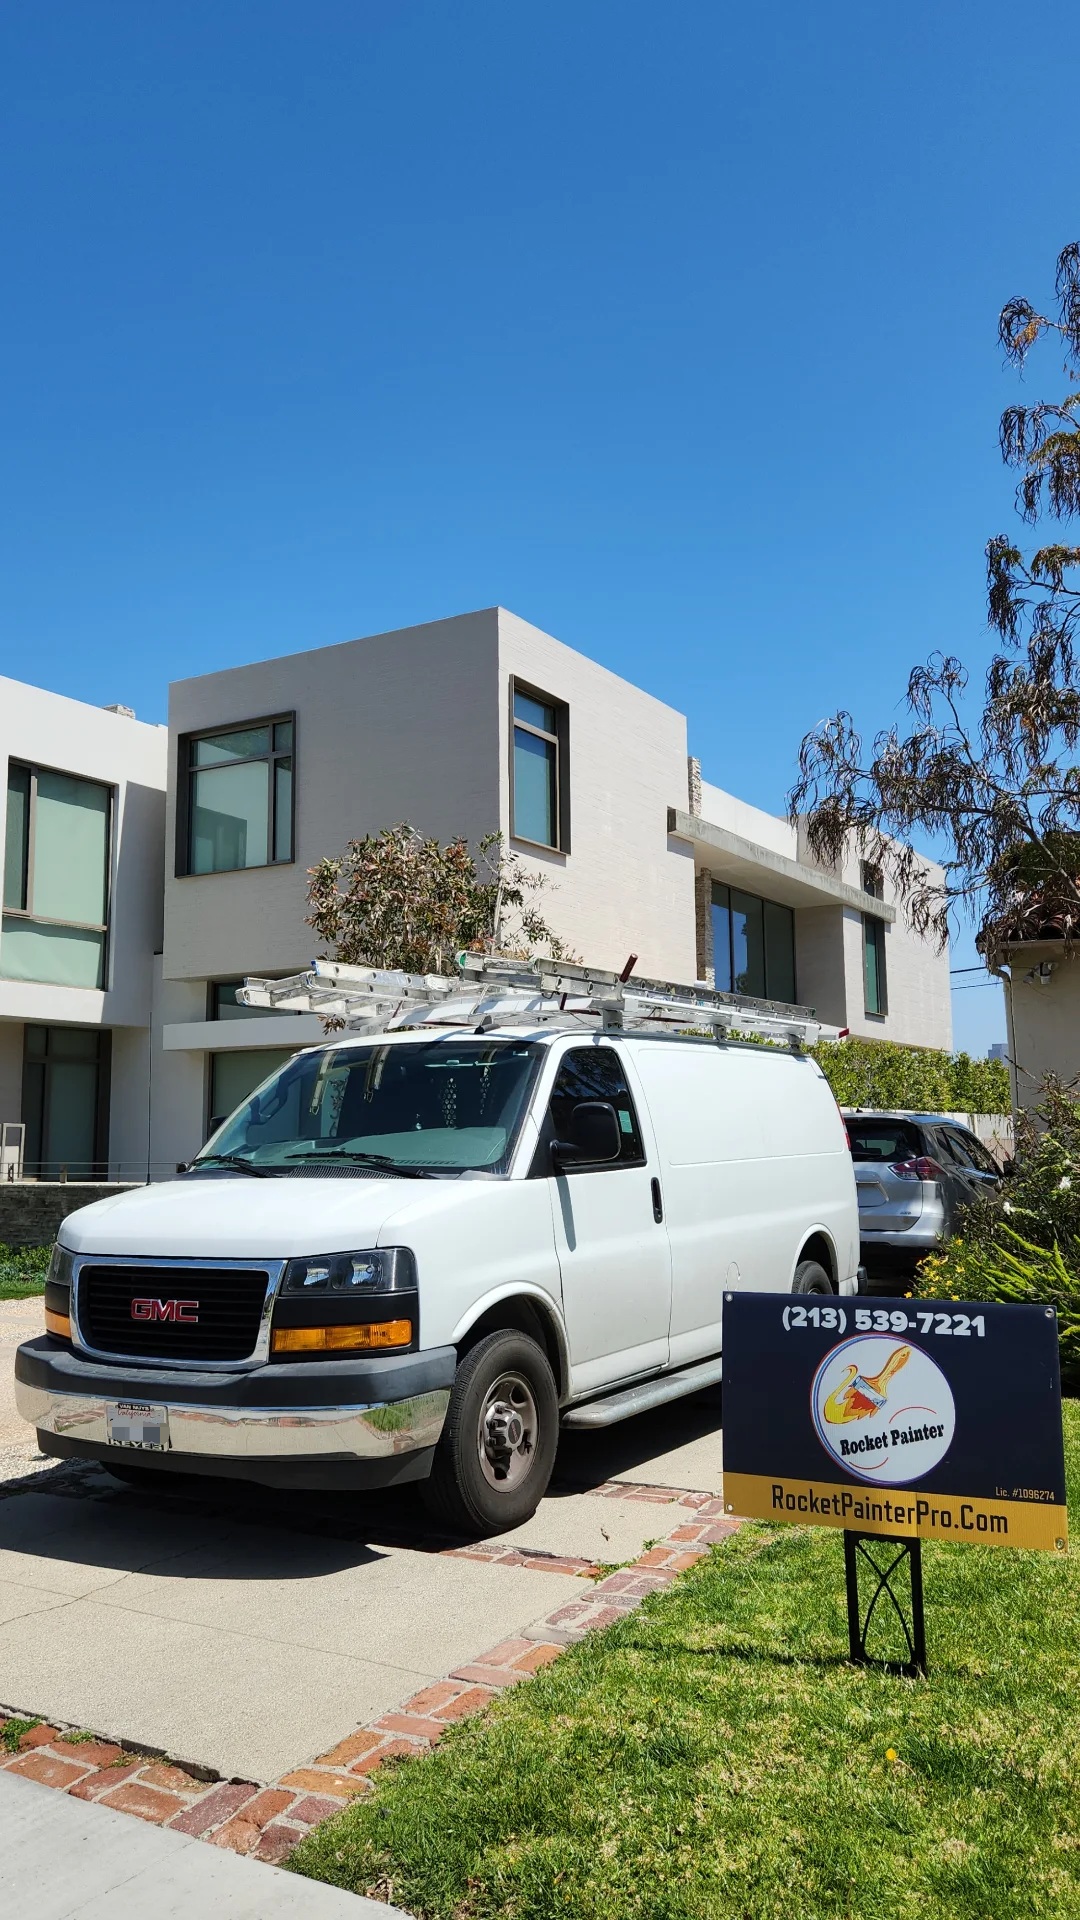 Modern minimalist  house with a white smooth stucco. White painter's van in the front.